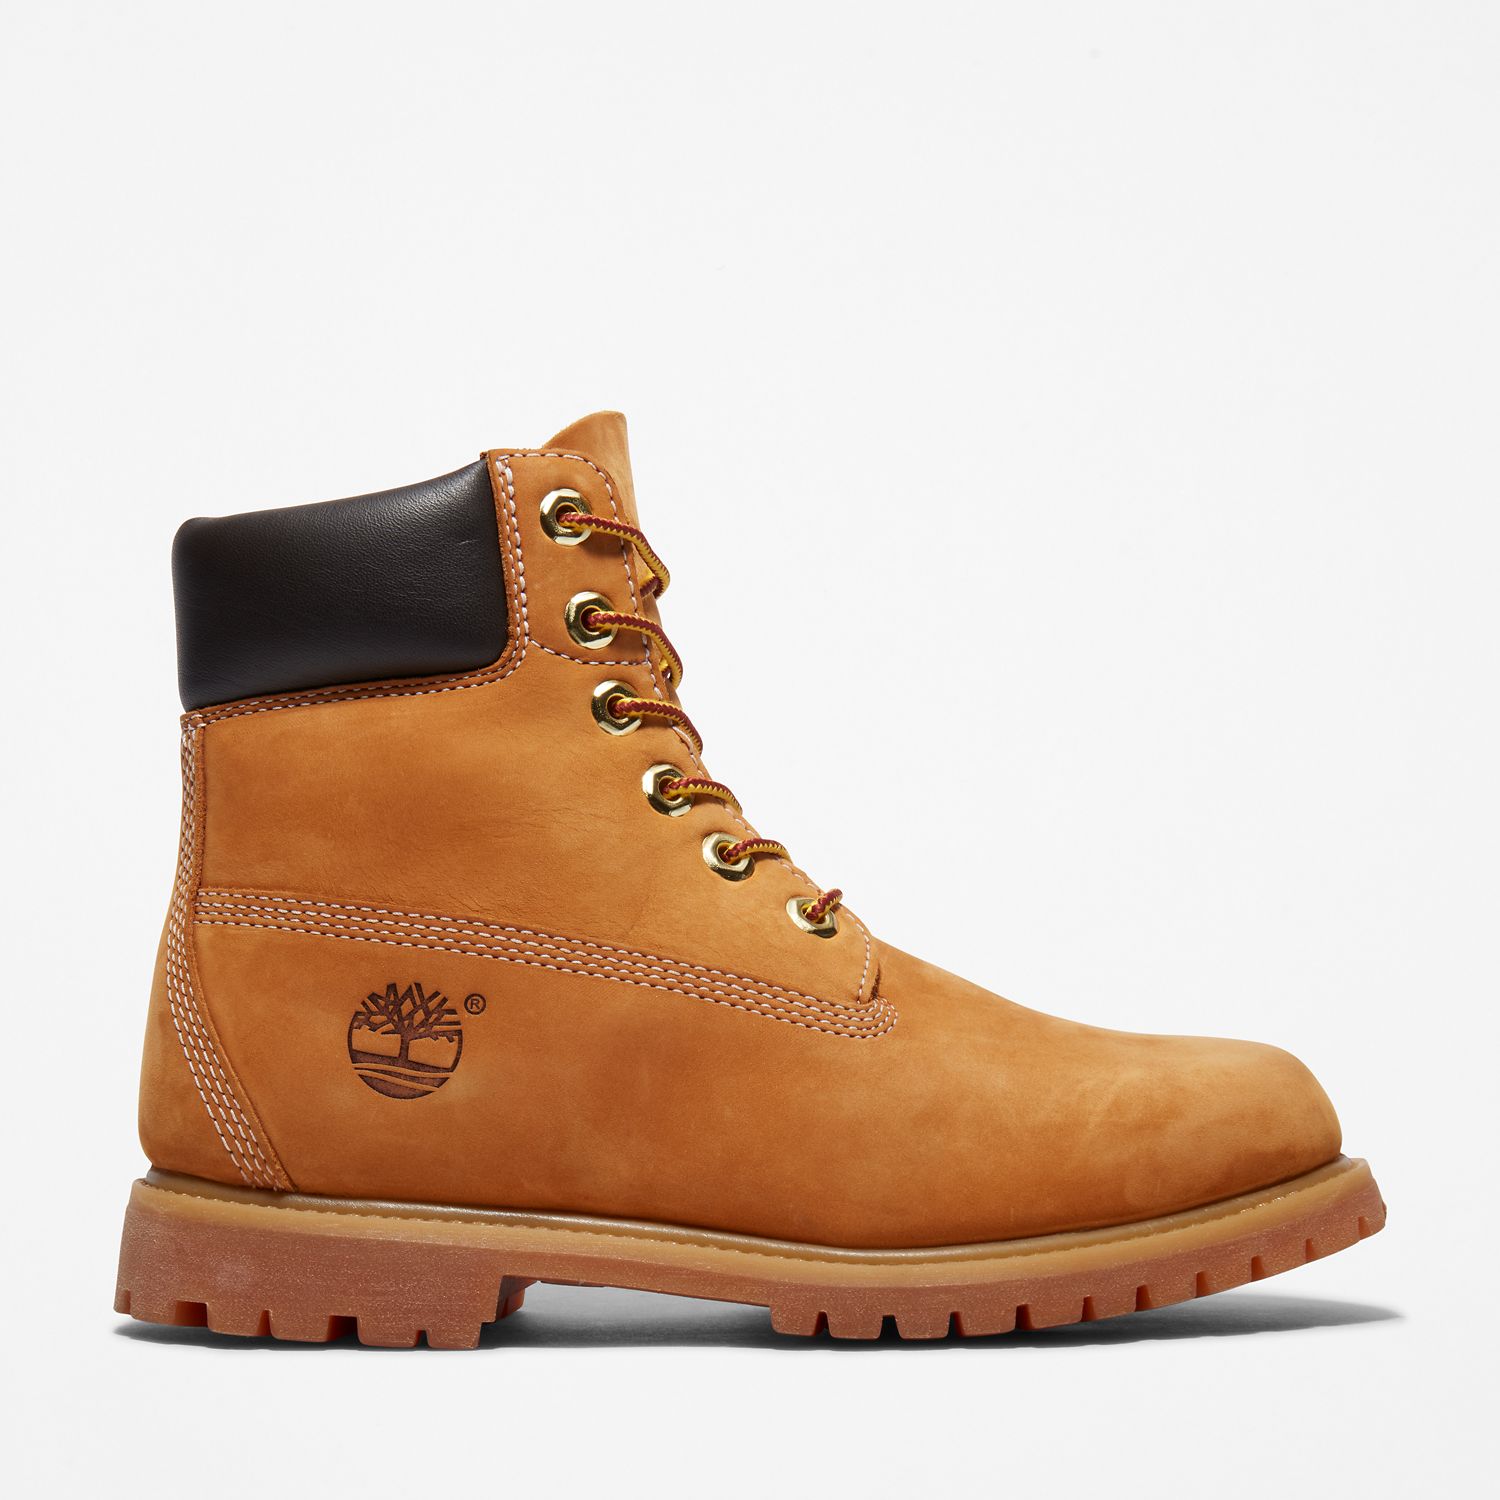 Timberland Vs Columbia (The Definitive Guide) - Unlock Wilderness